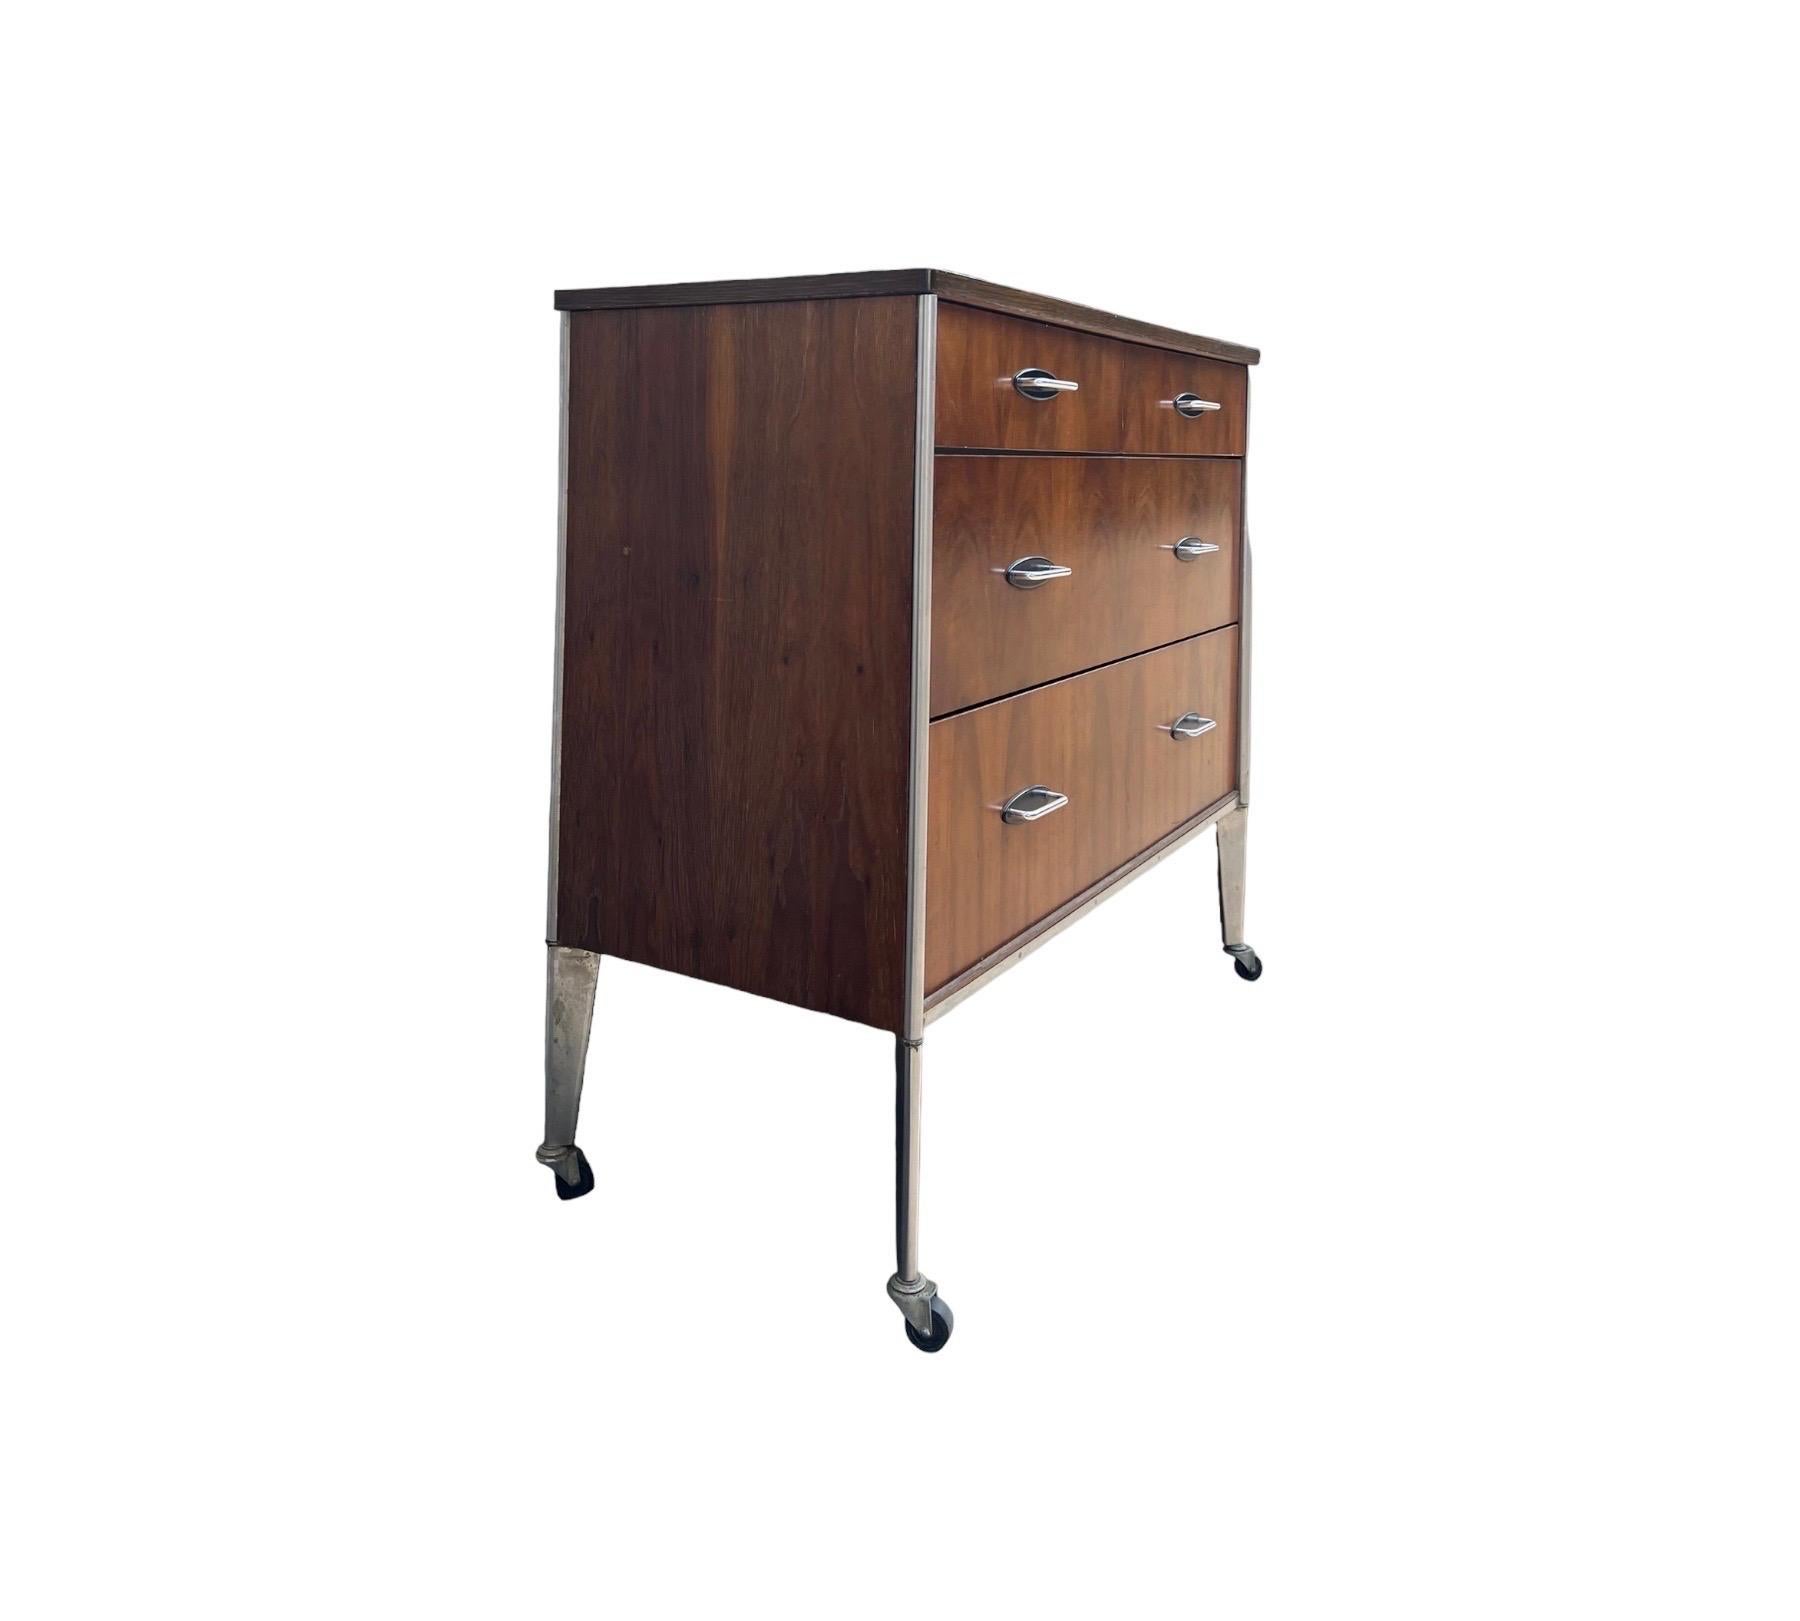 Vintage Mid Century Modern Dresser By Raymond Loewy For Hill Rom Walnut Casters  In Good Condition For Sale In Seattle, WA